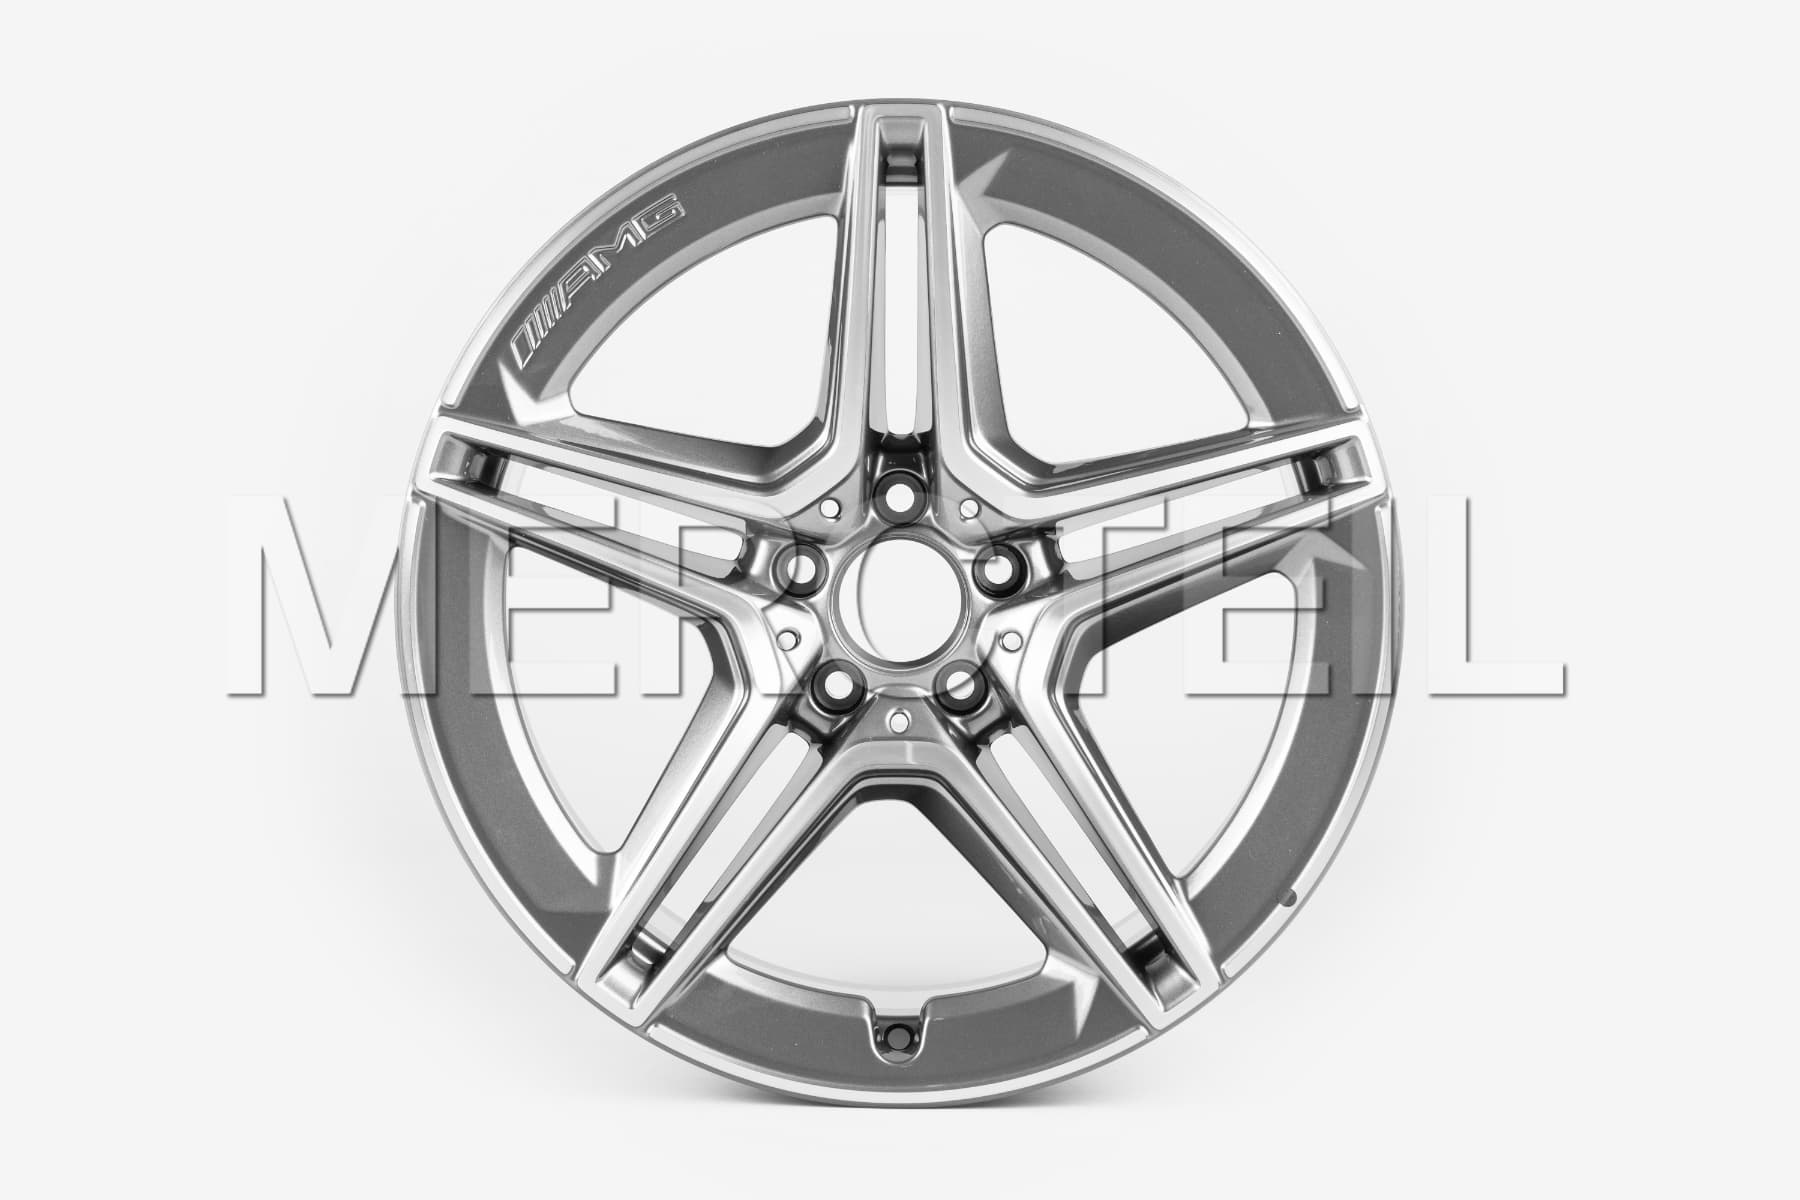 AMG GLE-Class 20 Inch 5-Double-Spoke Tremolit Alloy Wheels Set 167 Genuine Mercedes-AMG (Part number: A16740132007X44)